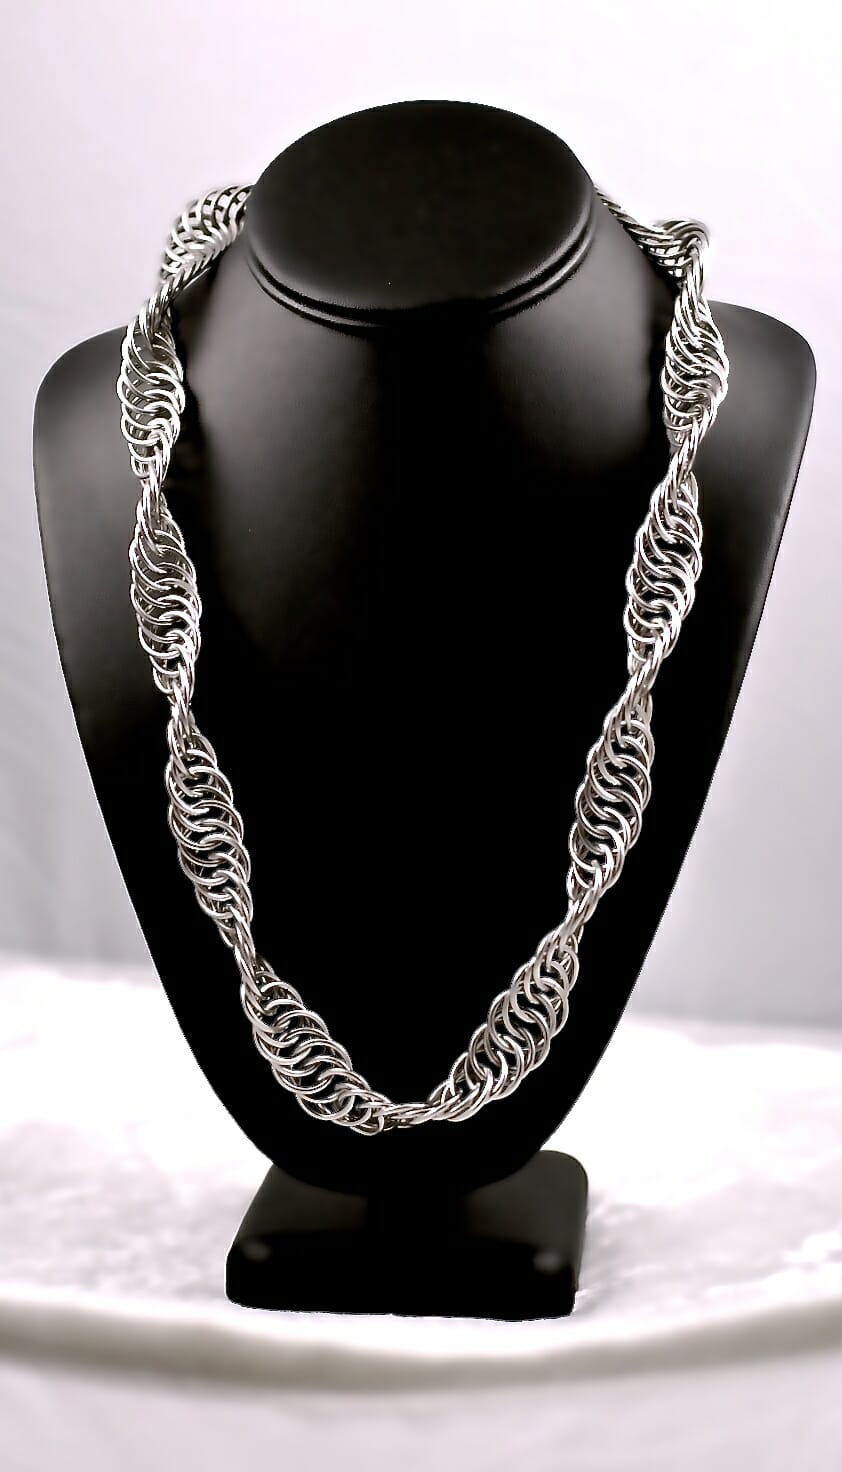 Chainmaille Necklace in Stainless Steel